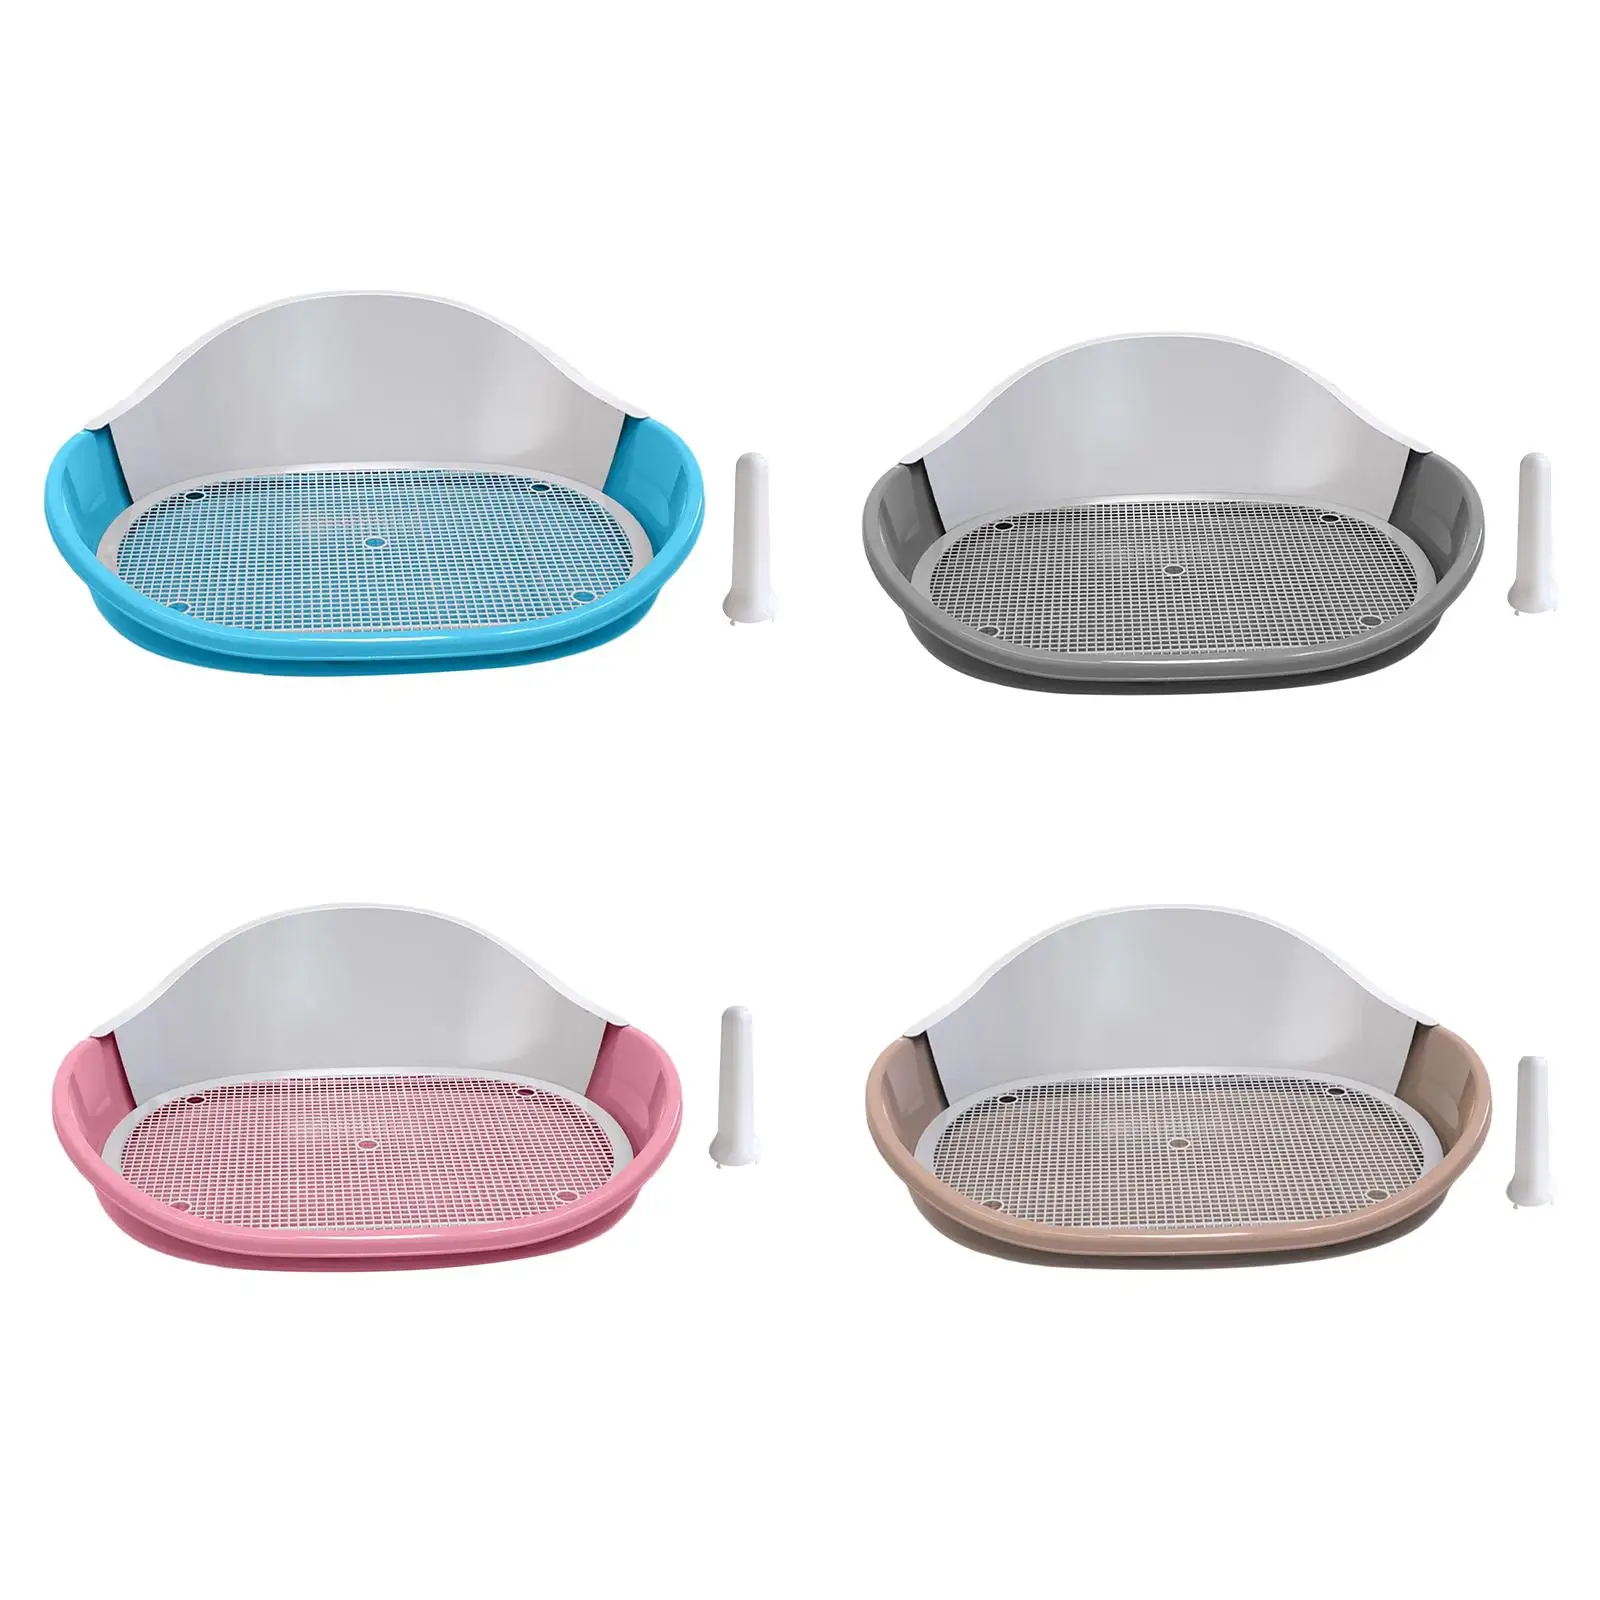 Dog Toilet Bedpan Pee Pad Lattice Potty Trainer Reusable Urinal for Cats Accessories